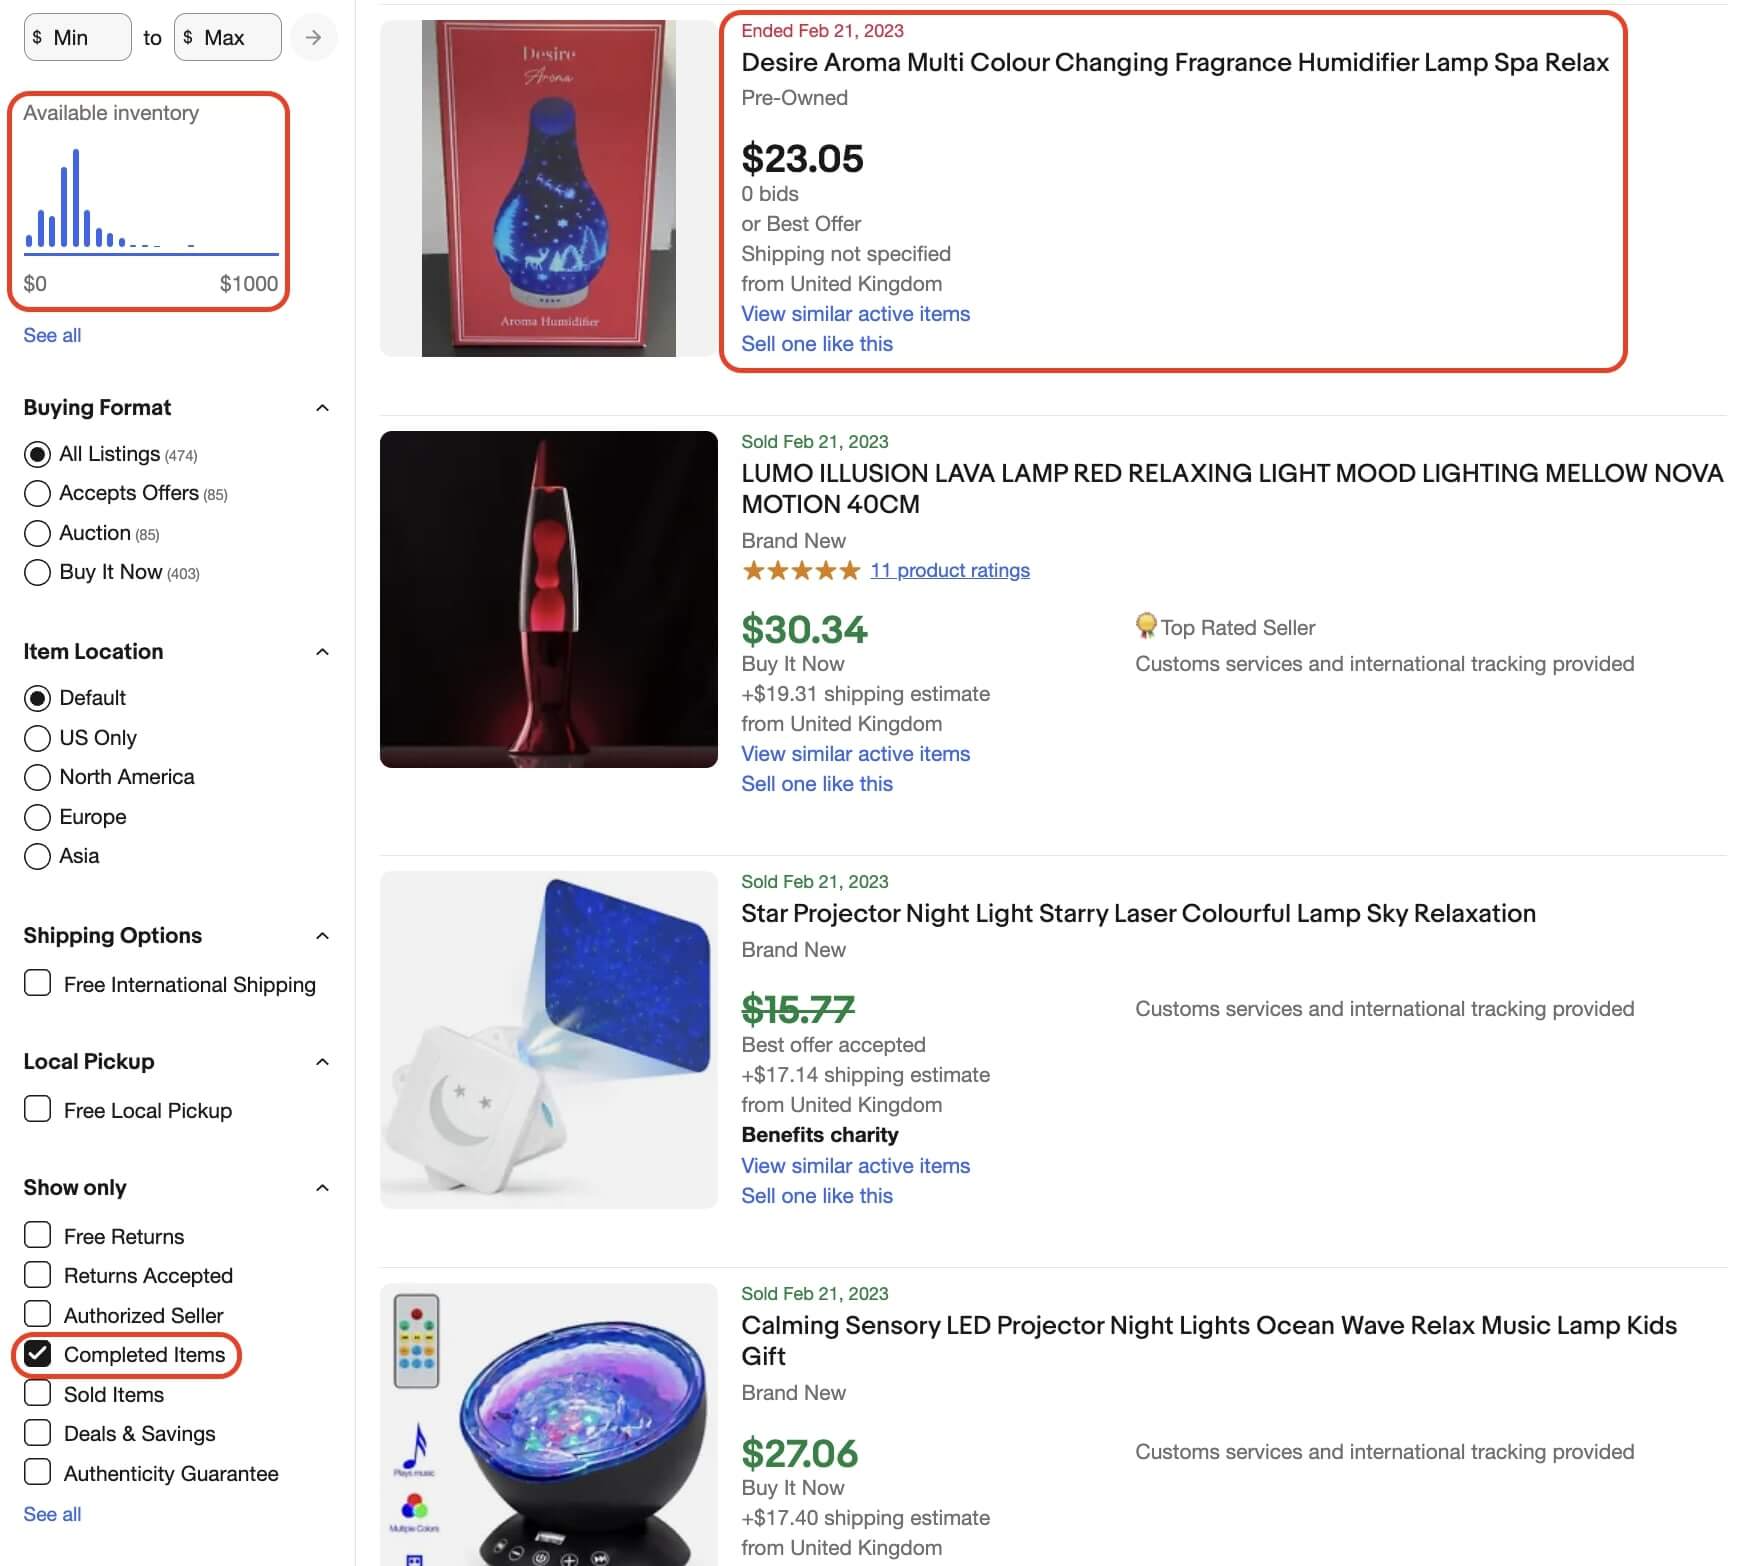 Results in the eBay search with several filters to the left and results to the left (lamps). A result (humidifier lamp", the "available inventory section," and the filter "Show only - completed items" are highlighted in red.